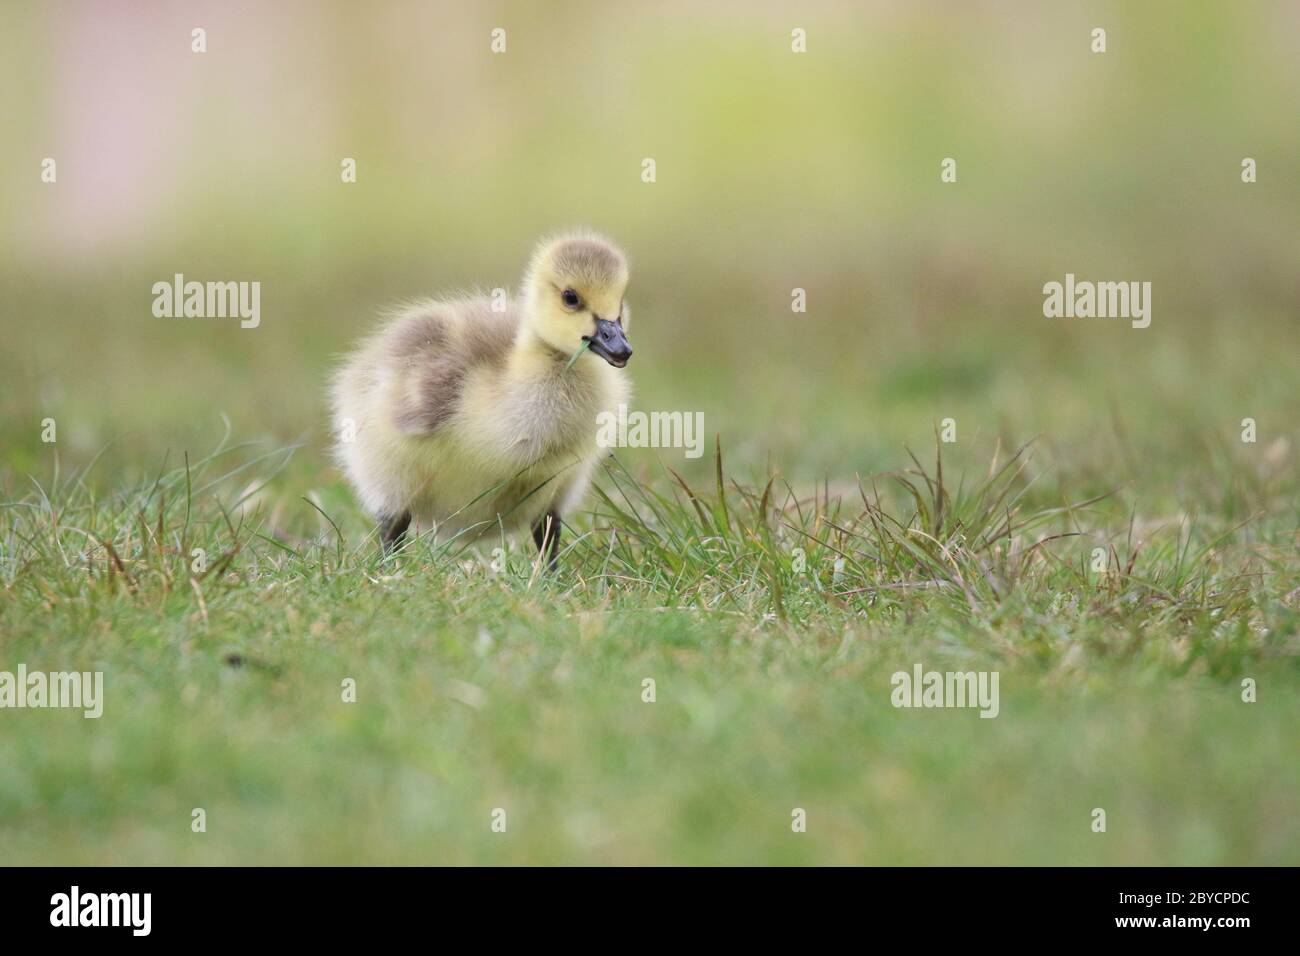 A yellow fluffy Canada goose gosling foraging in the grass in Springtime Stock Photo